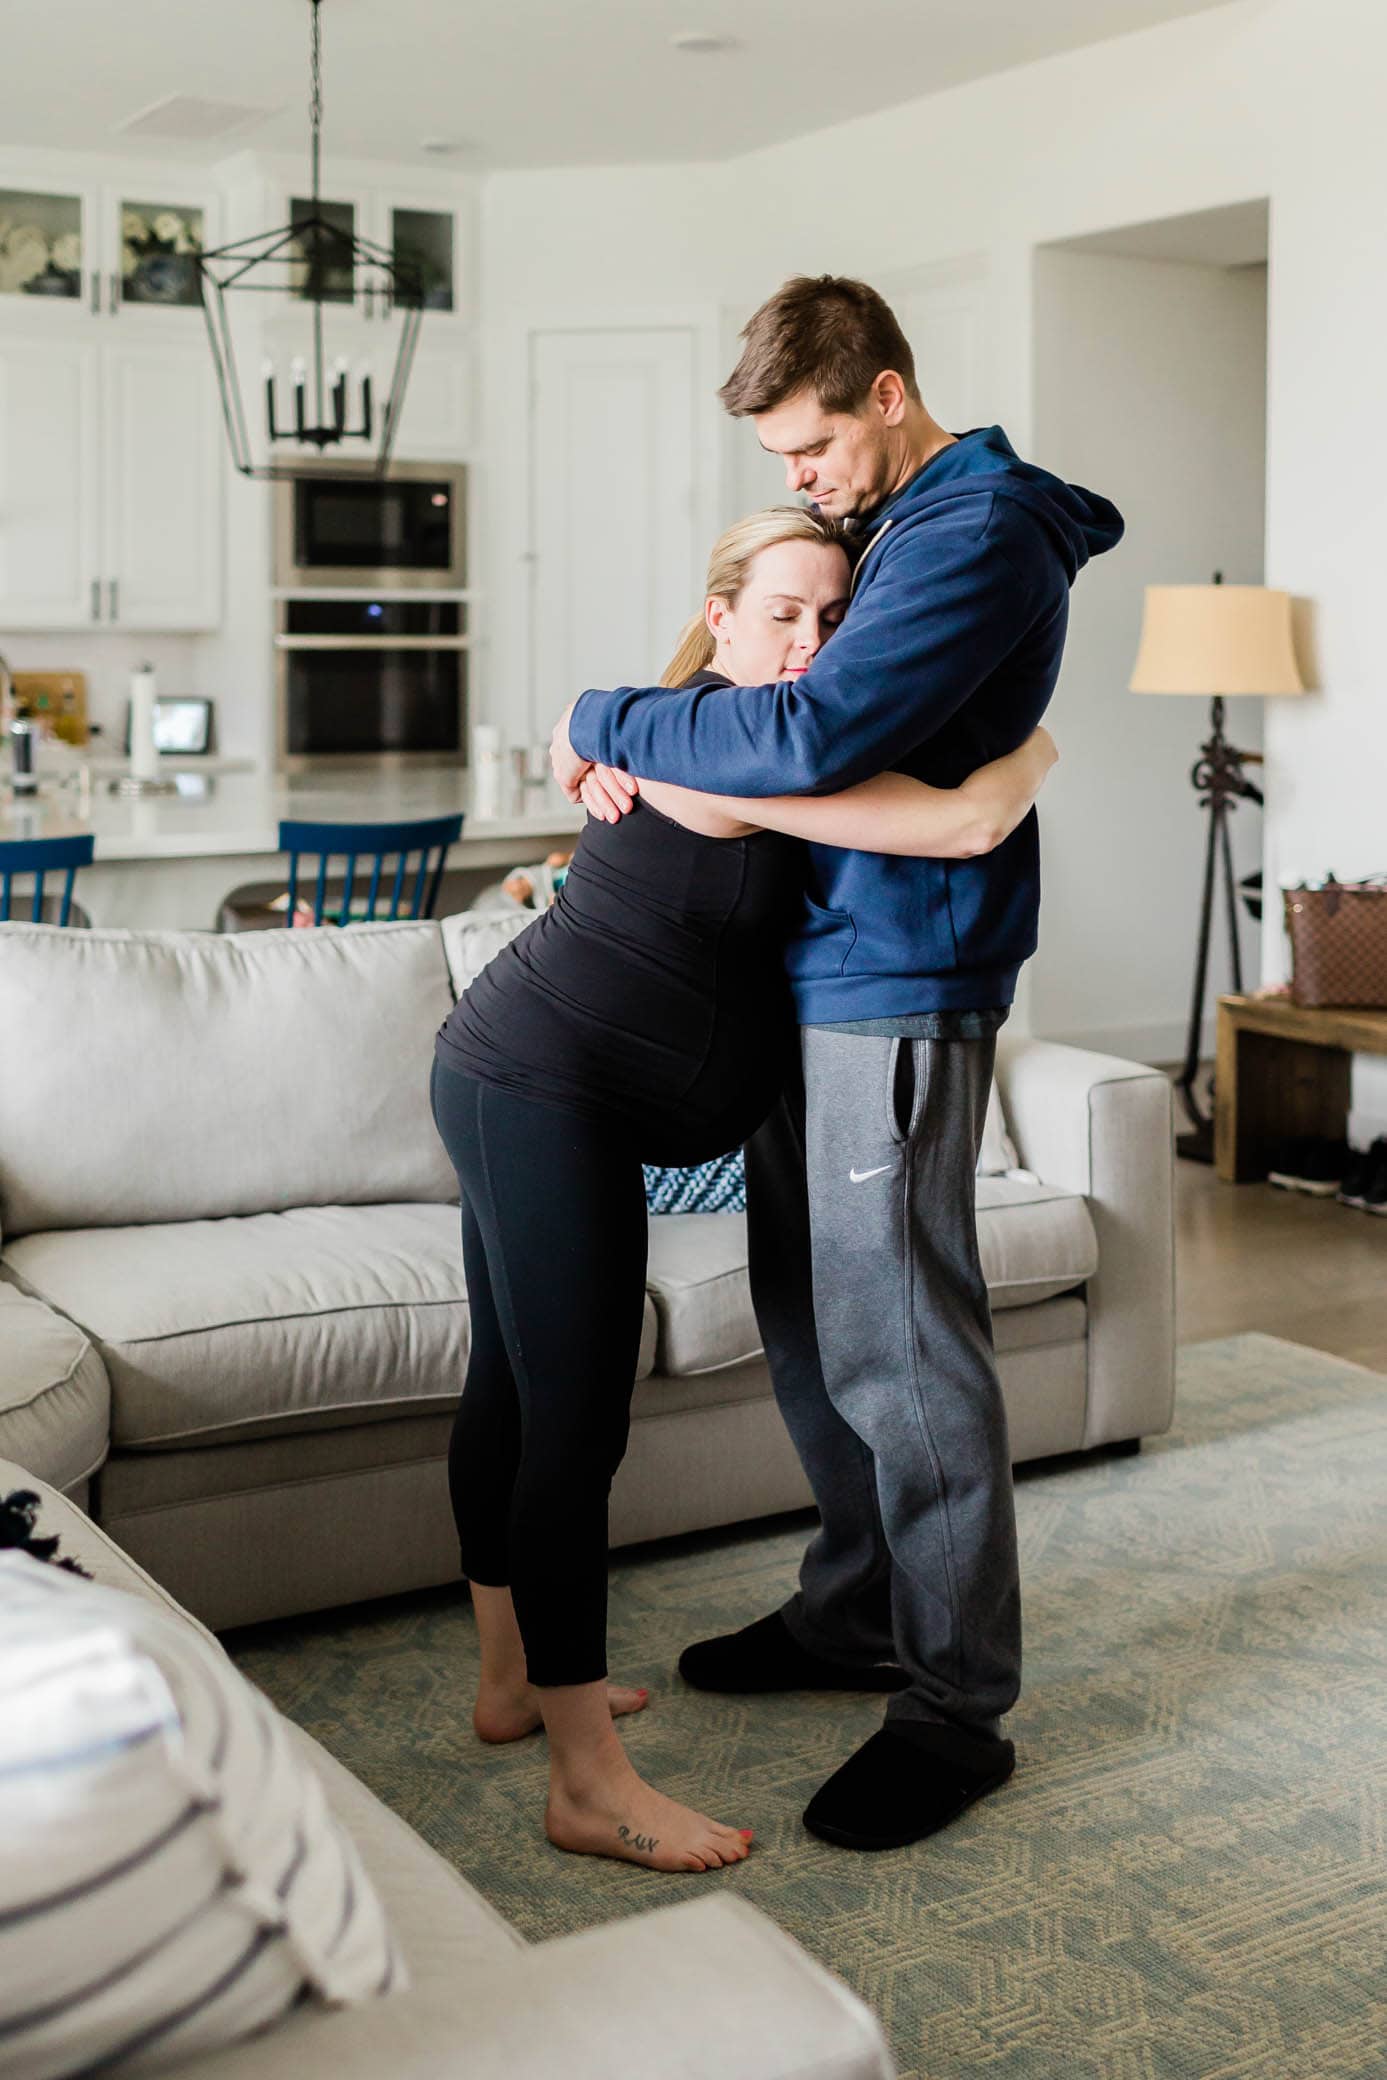 Pregnant woman slow dancing with her partner in labor.